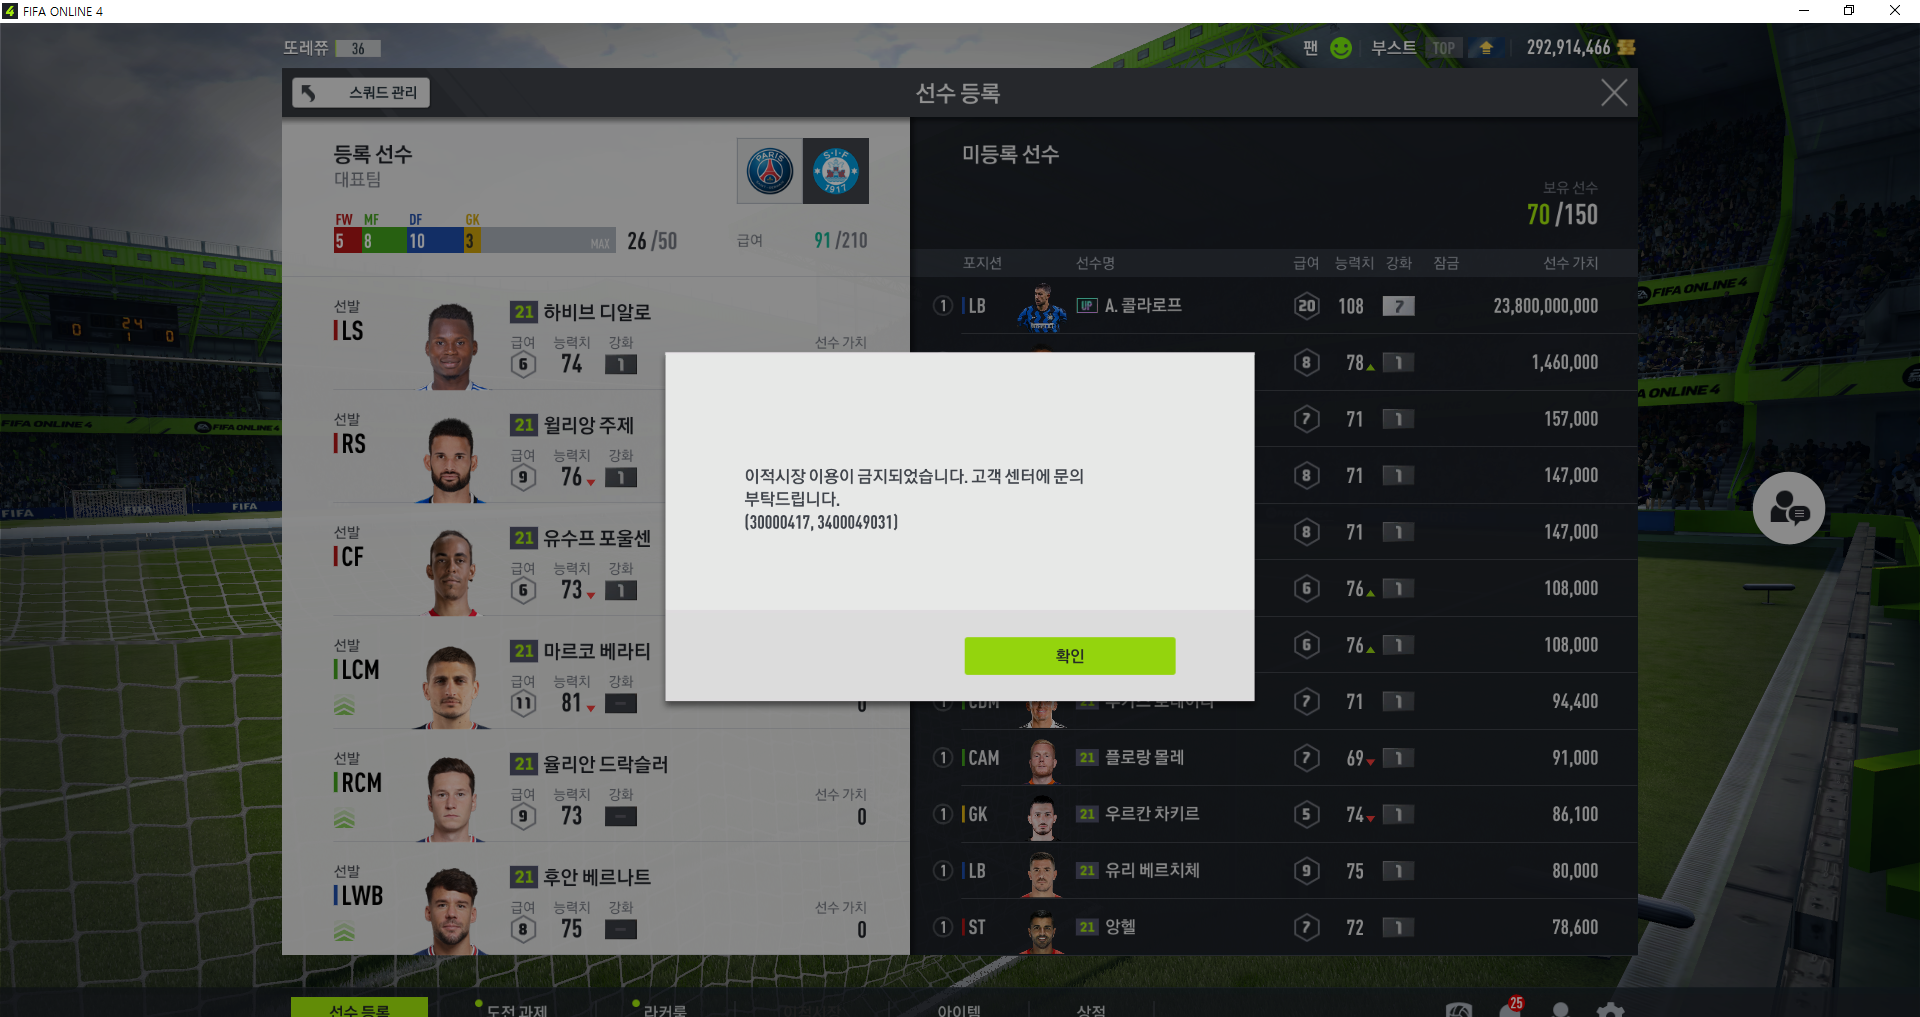 FIFA ONLINE 4 2022-03-09 오후 7_37_32.png